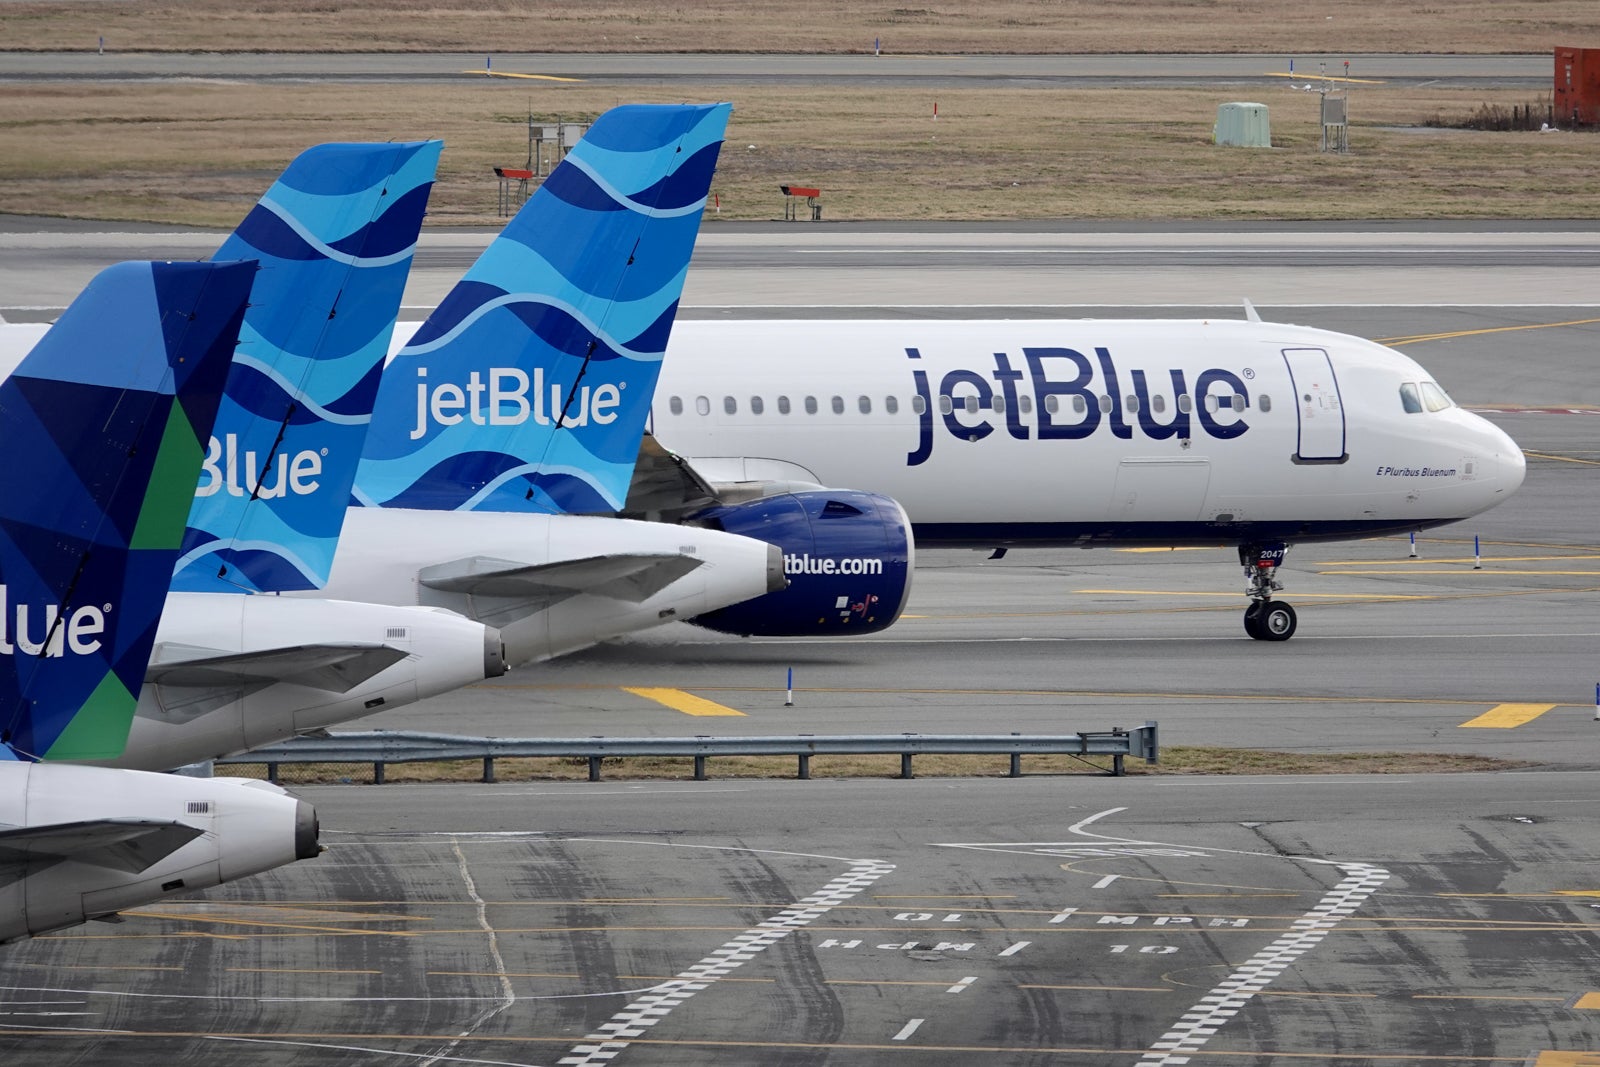 You are currently viewing JetBlue TrueBlue program: Earn and redeem points, transfer partners and more